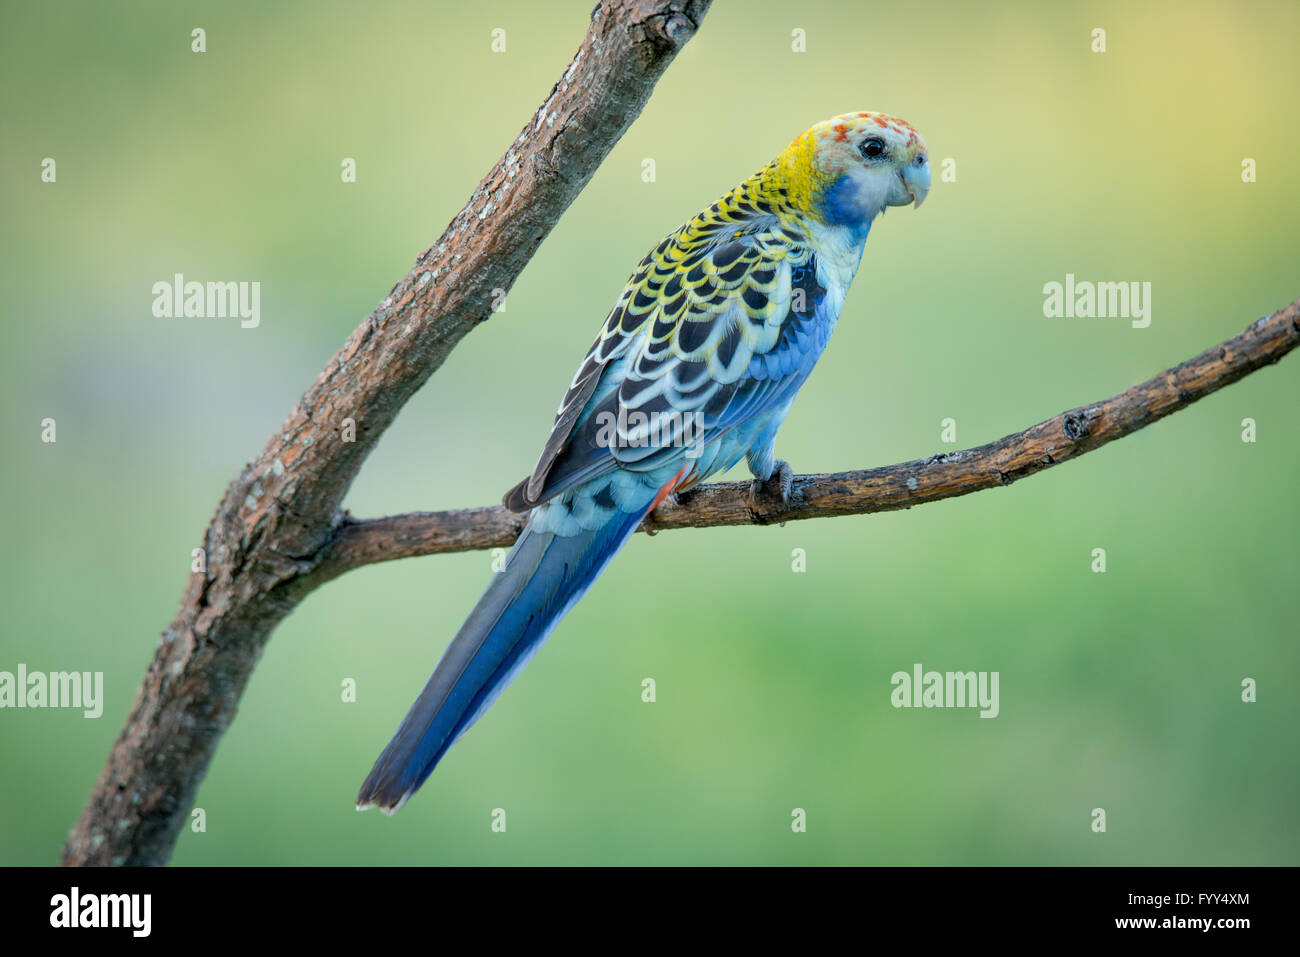 Colourful bird perched on branch, Australia Stock Photo